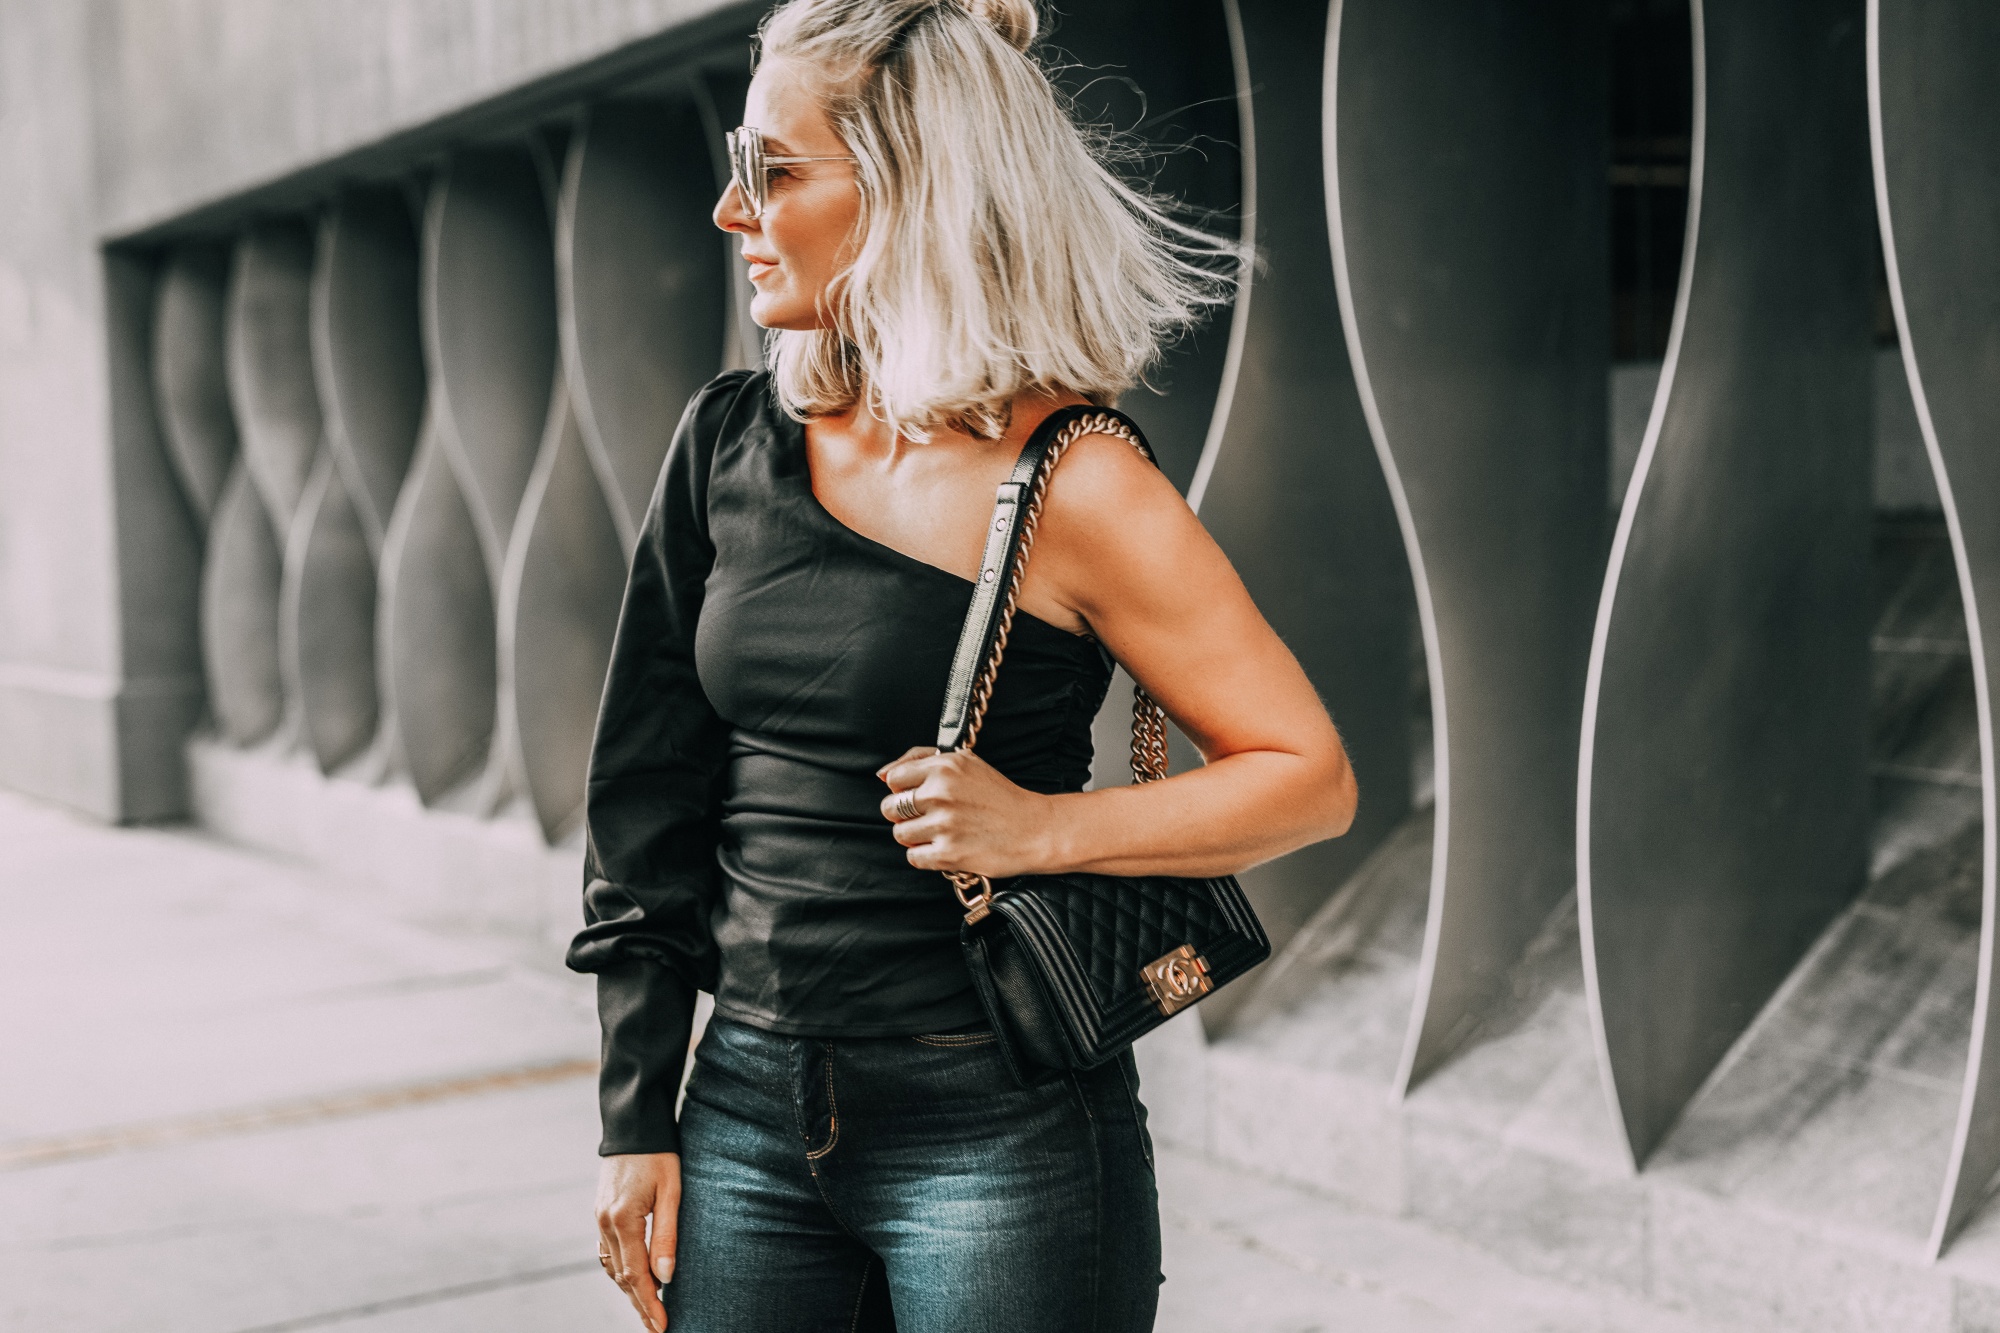 Sexy one-shoulder date night top for women over 40, easy date night outfit styled by fashion blogger over 40 Busbee Style with black shoulder baring l'Academie top, dark wash l'Agence skinny jeans, and quilted Chanel boy bag